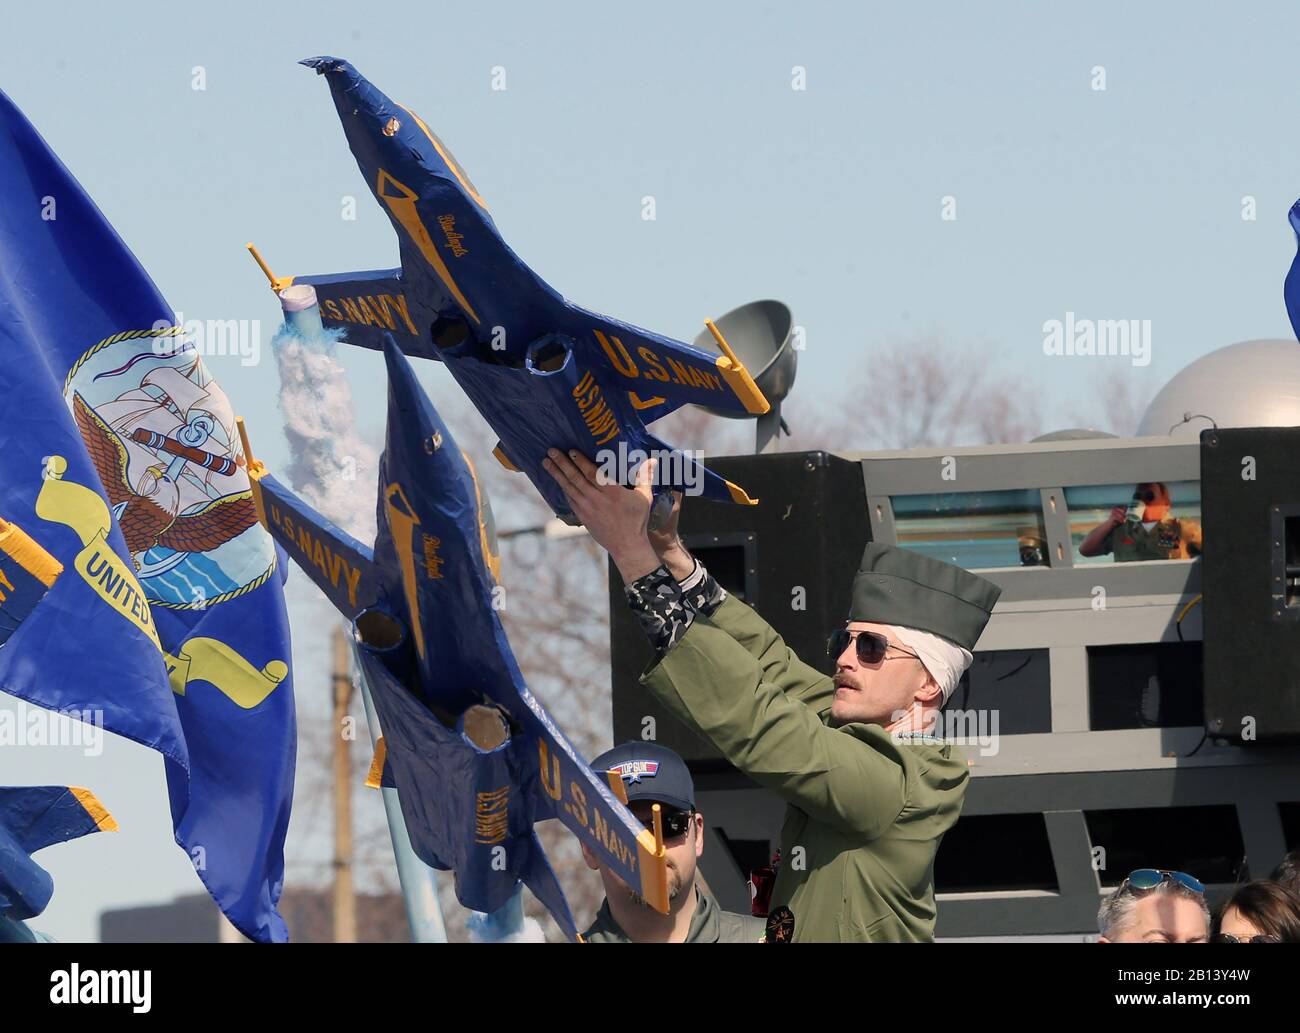 St. Louis, United States. 22nd Feb, 2020. A participant in the St. Louis Mardi Gras Parade displays a Blue Angels jet in St. Louis on Saturday, February 22, 2020. The St. Louis Blues, winner of the 2019 Stanley Cup, were the theme of the Mardi Gras Parade, thus the Blue Angels. Photo by Bill Greenblatt/UPI Credit: UPI/Alamy Live News Stock Photo